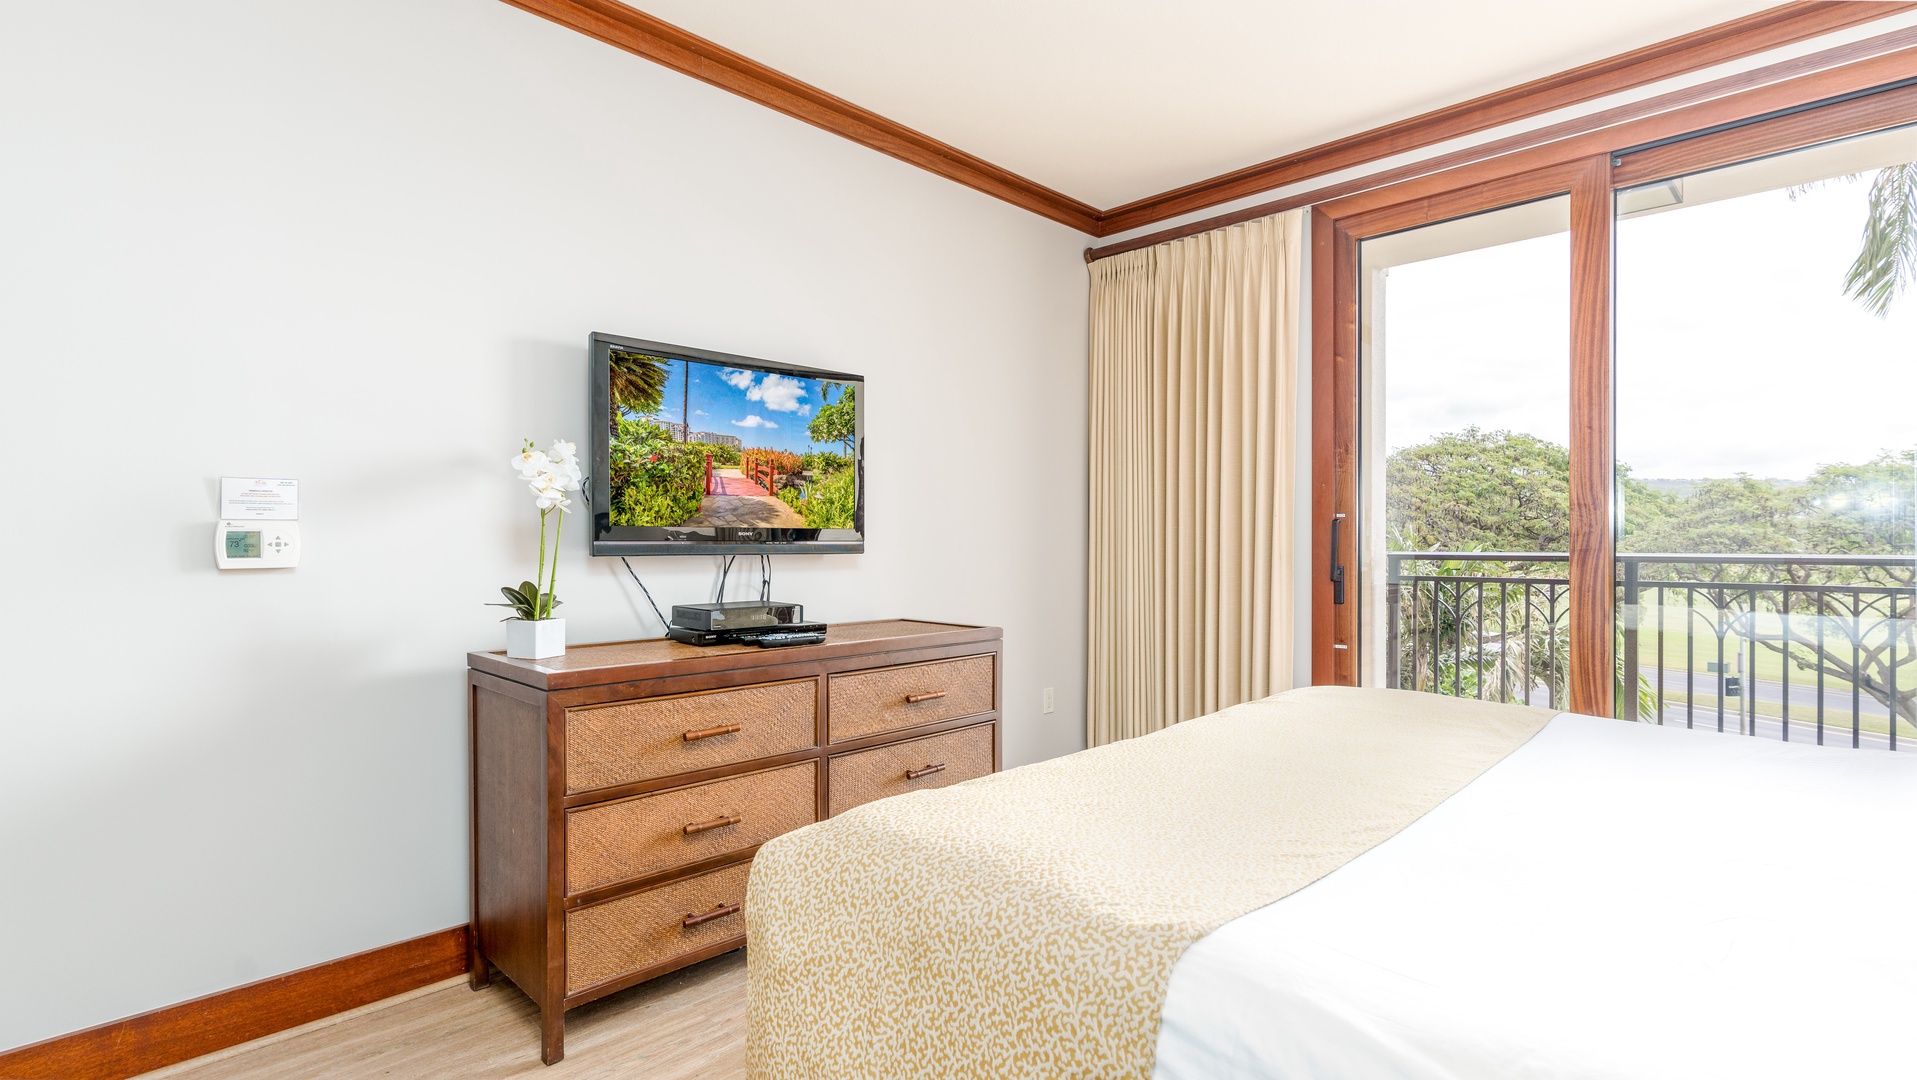 Kapolei Vacation Rentals, Ko Olina Beach Villas O305 - The primary guest bedroom TV and dresser.